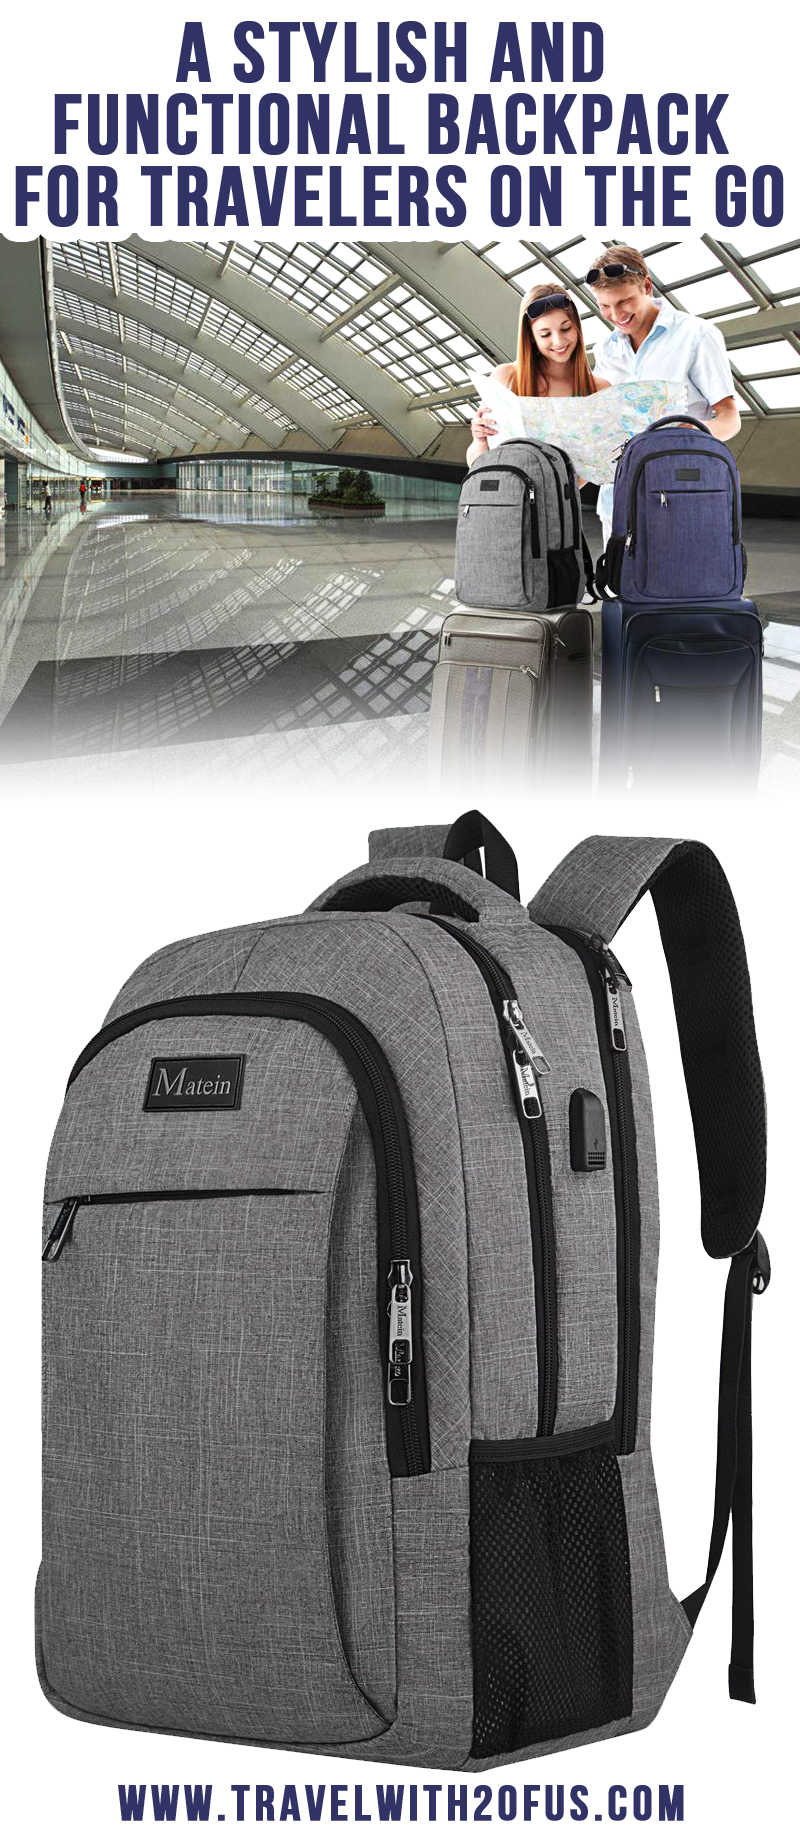 A Stylish And Functional Backpack For Travelers On The Go